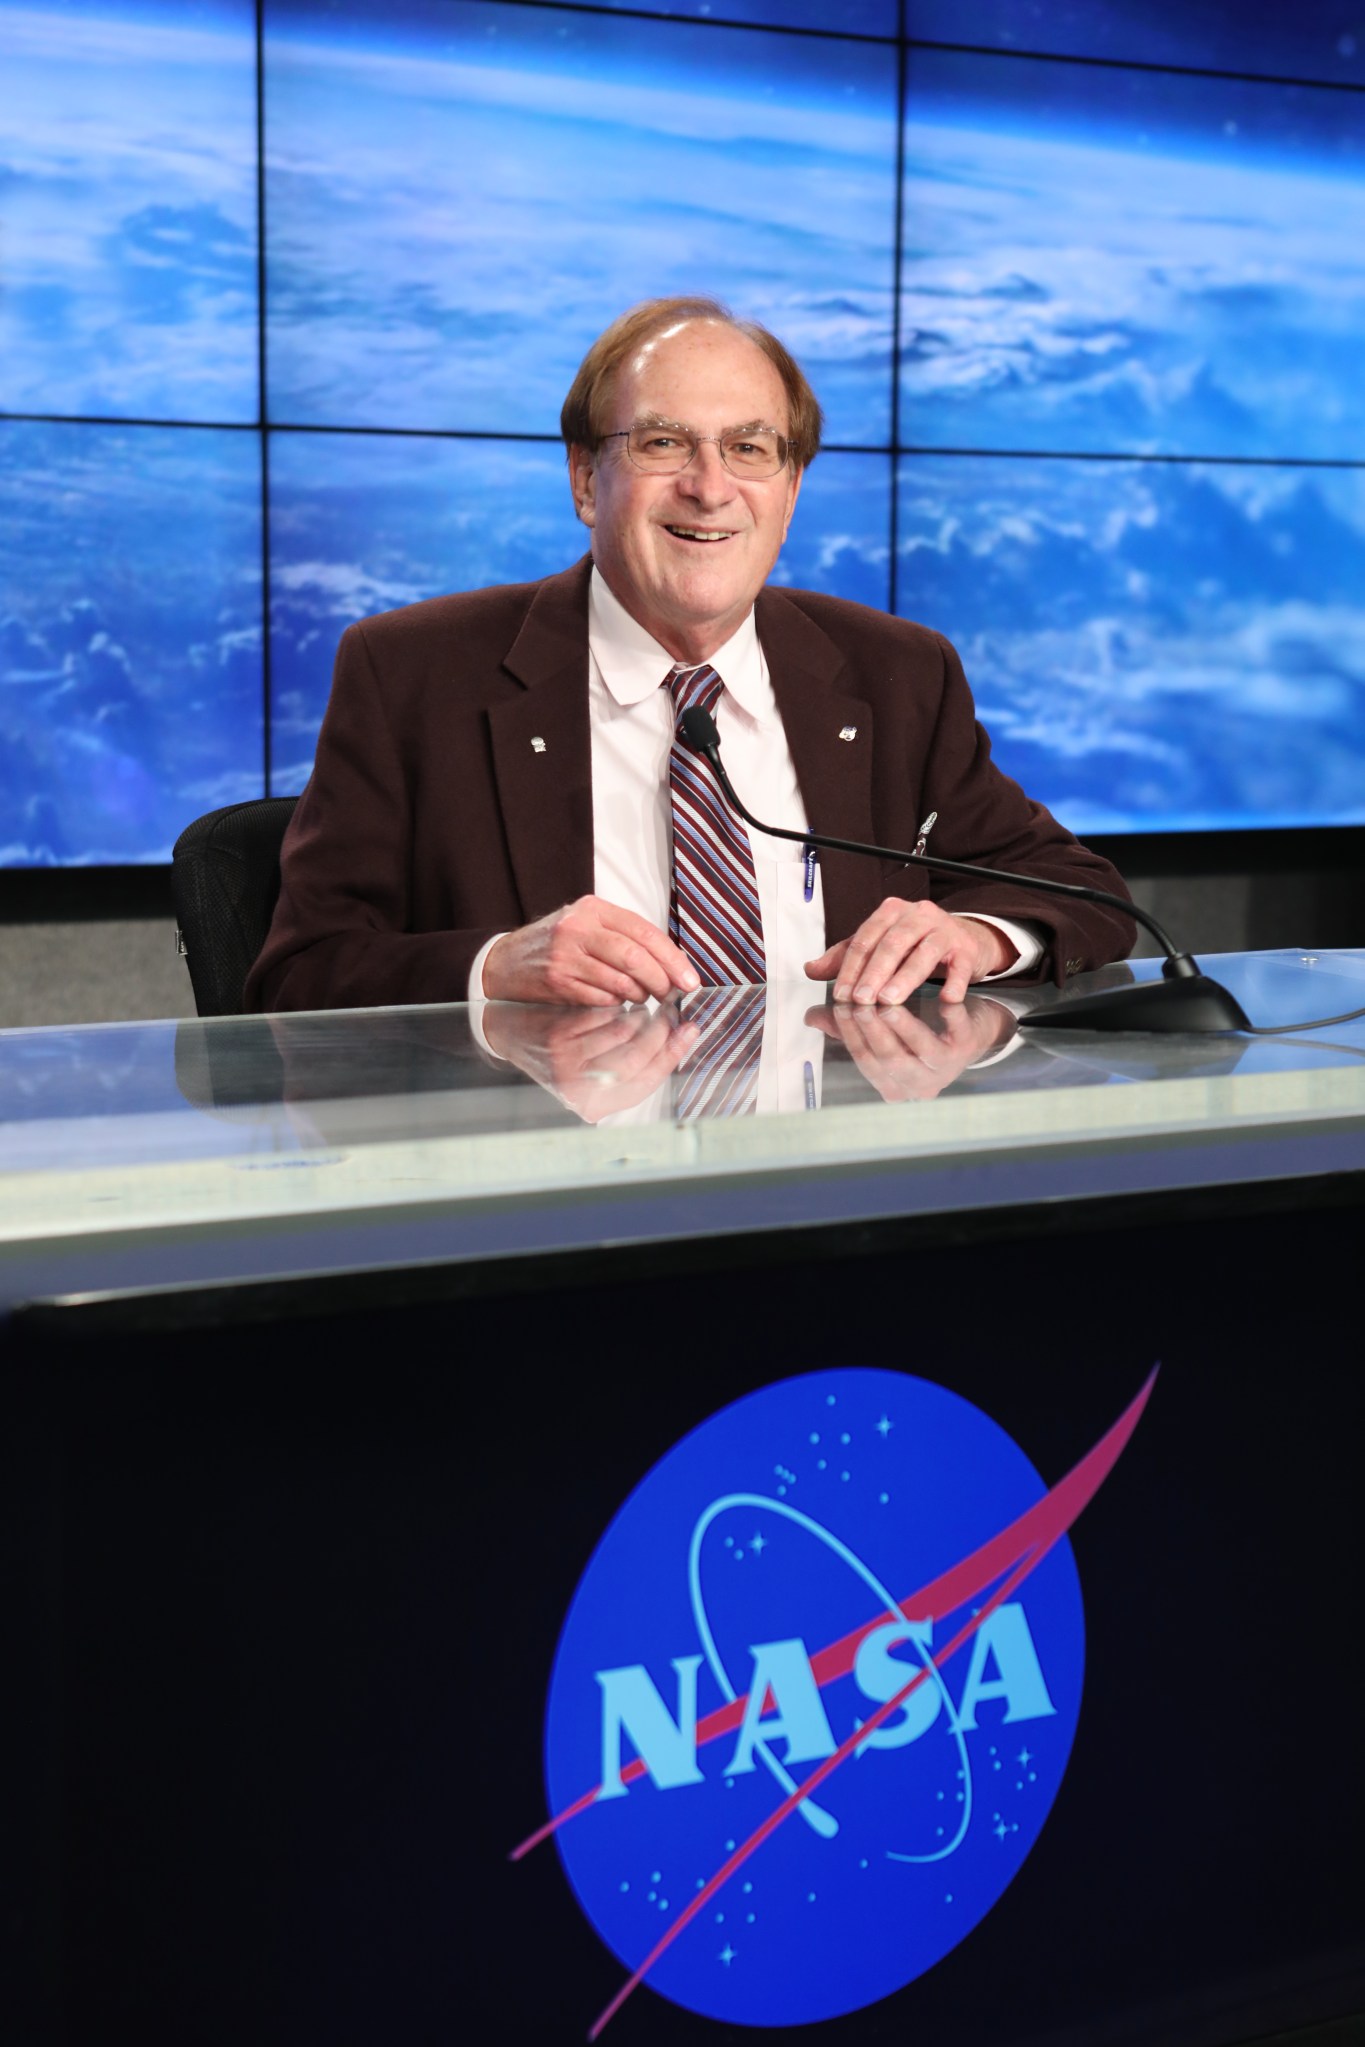 NASA Public Affairs Officer George Diller moderates a news conference at Kennedy Space Center.